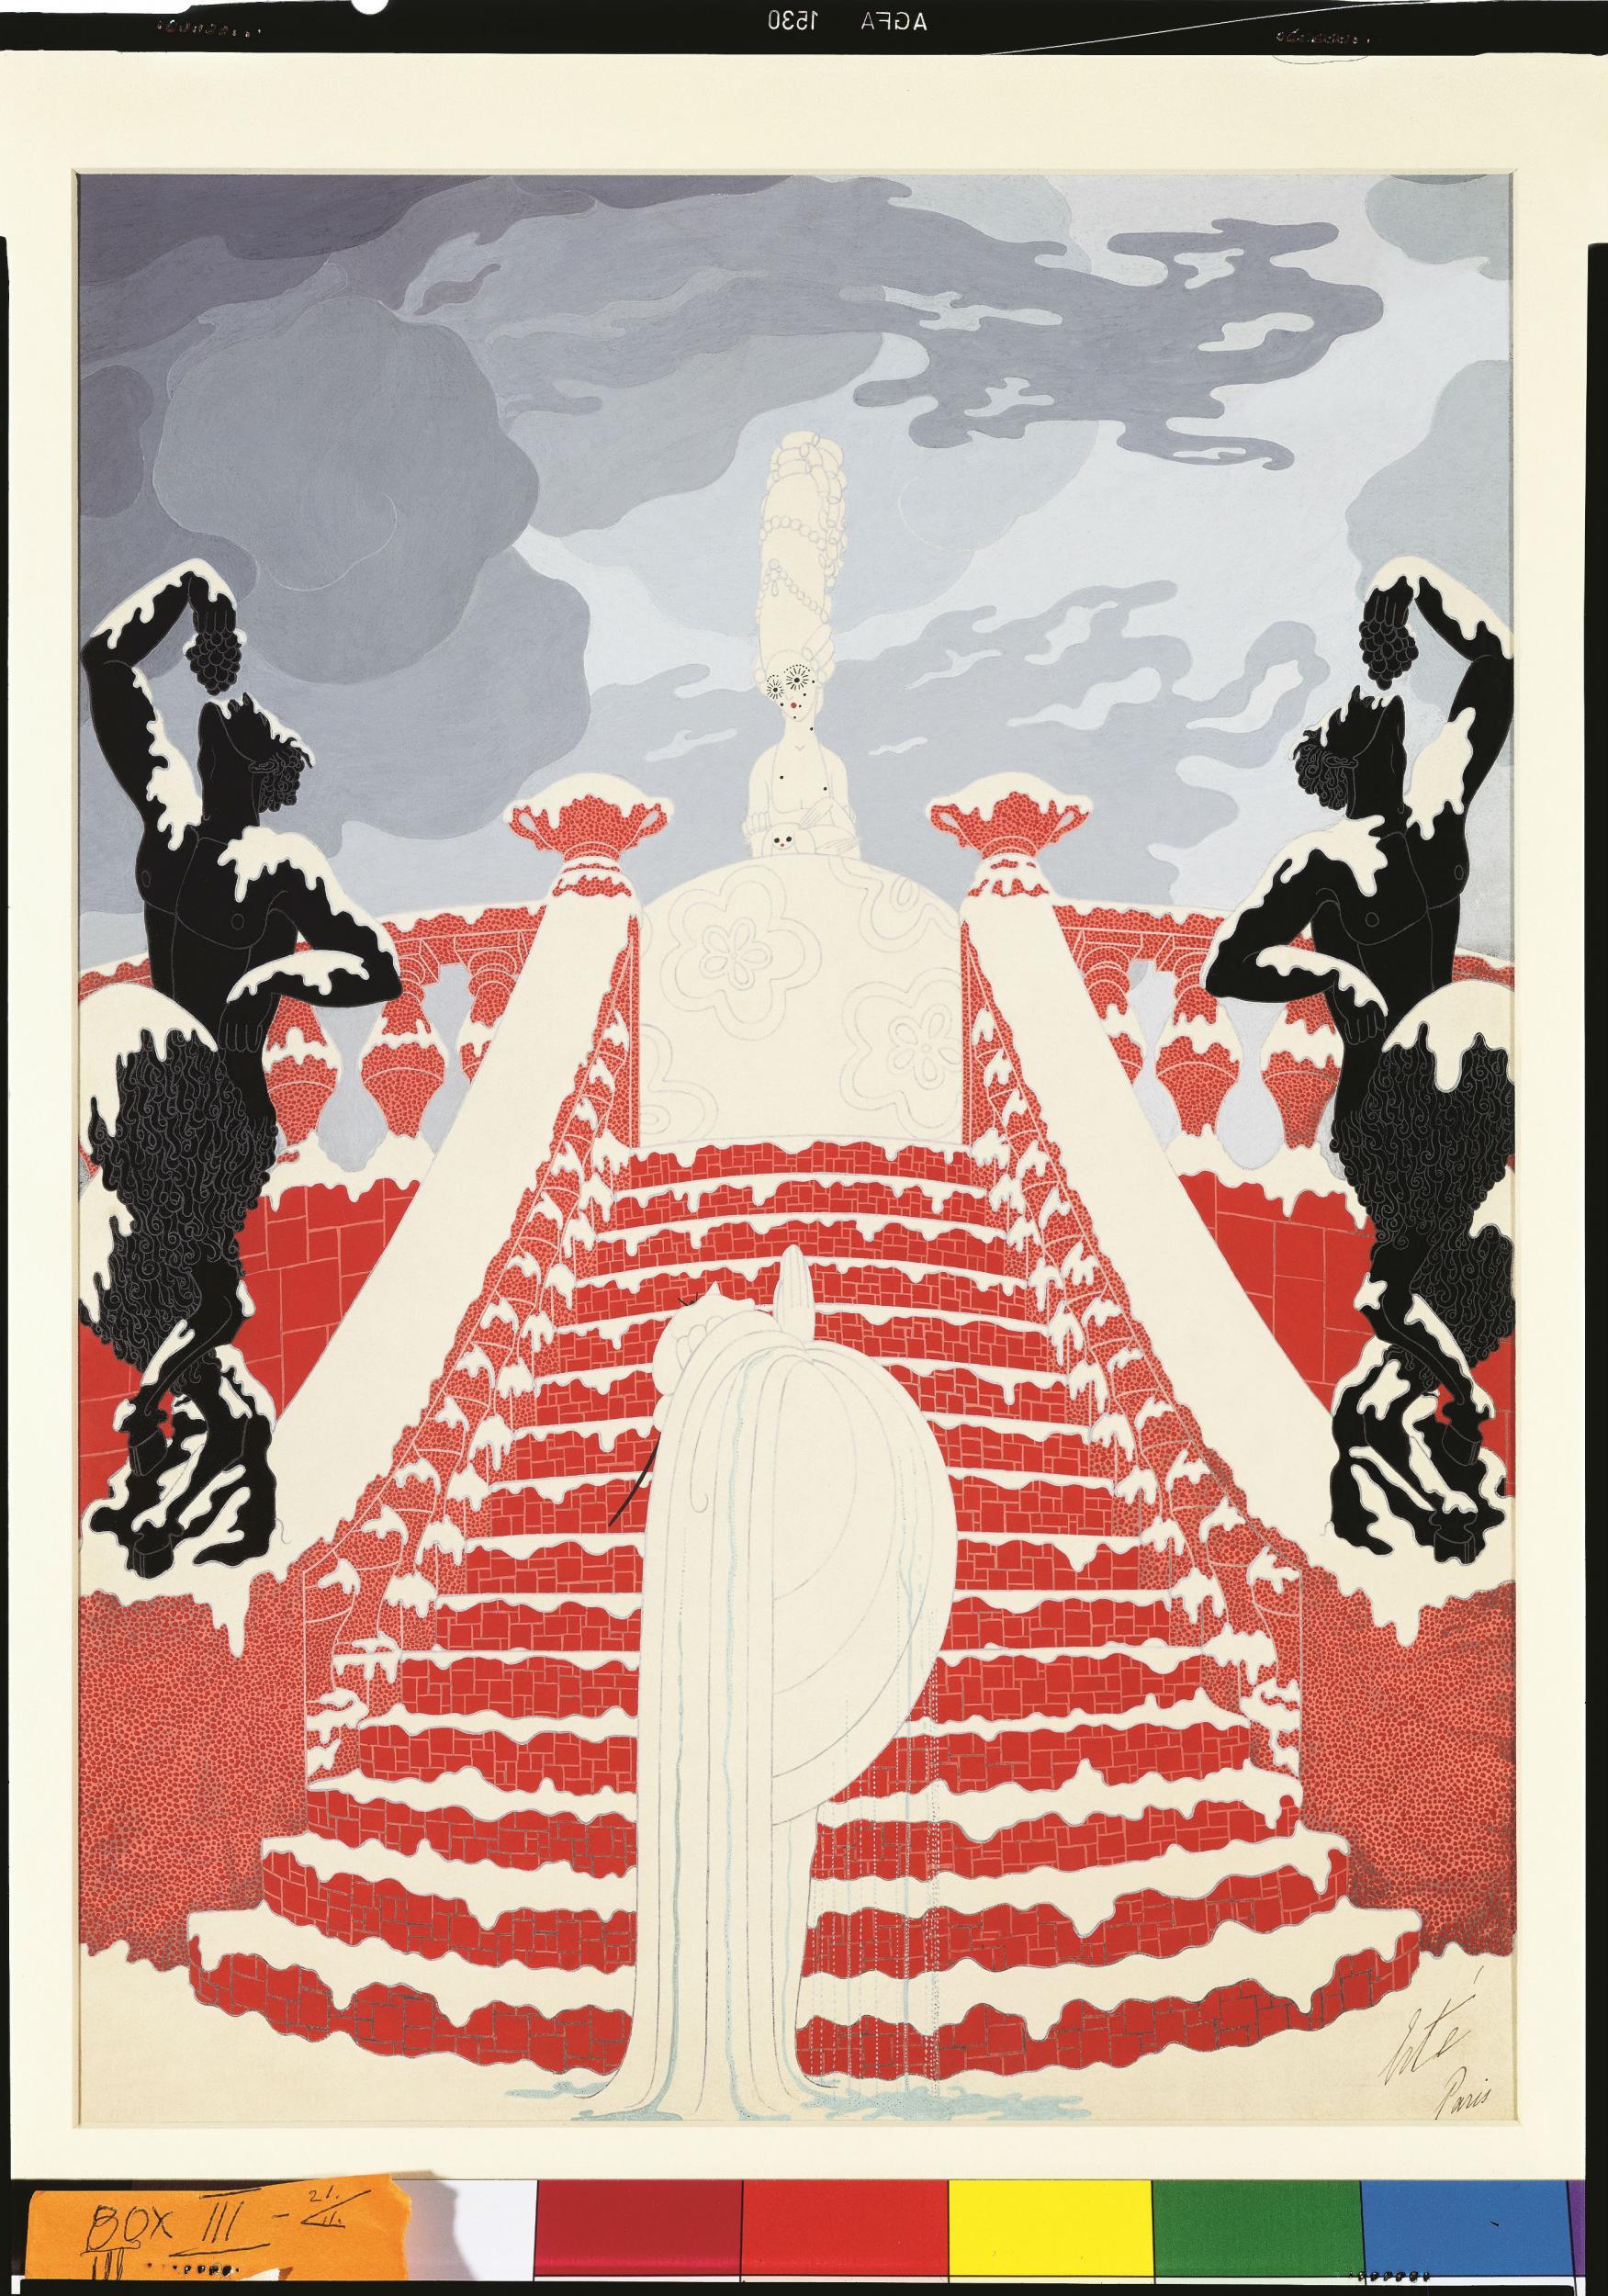 The Erté show on Royal St., an Art Deco delight not to miss